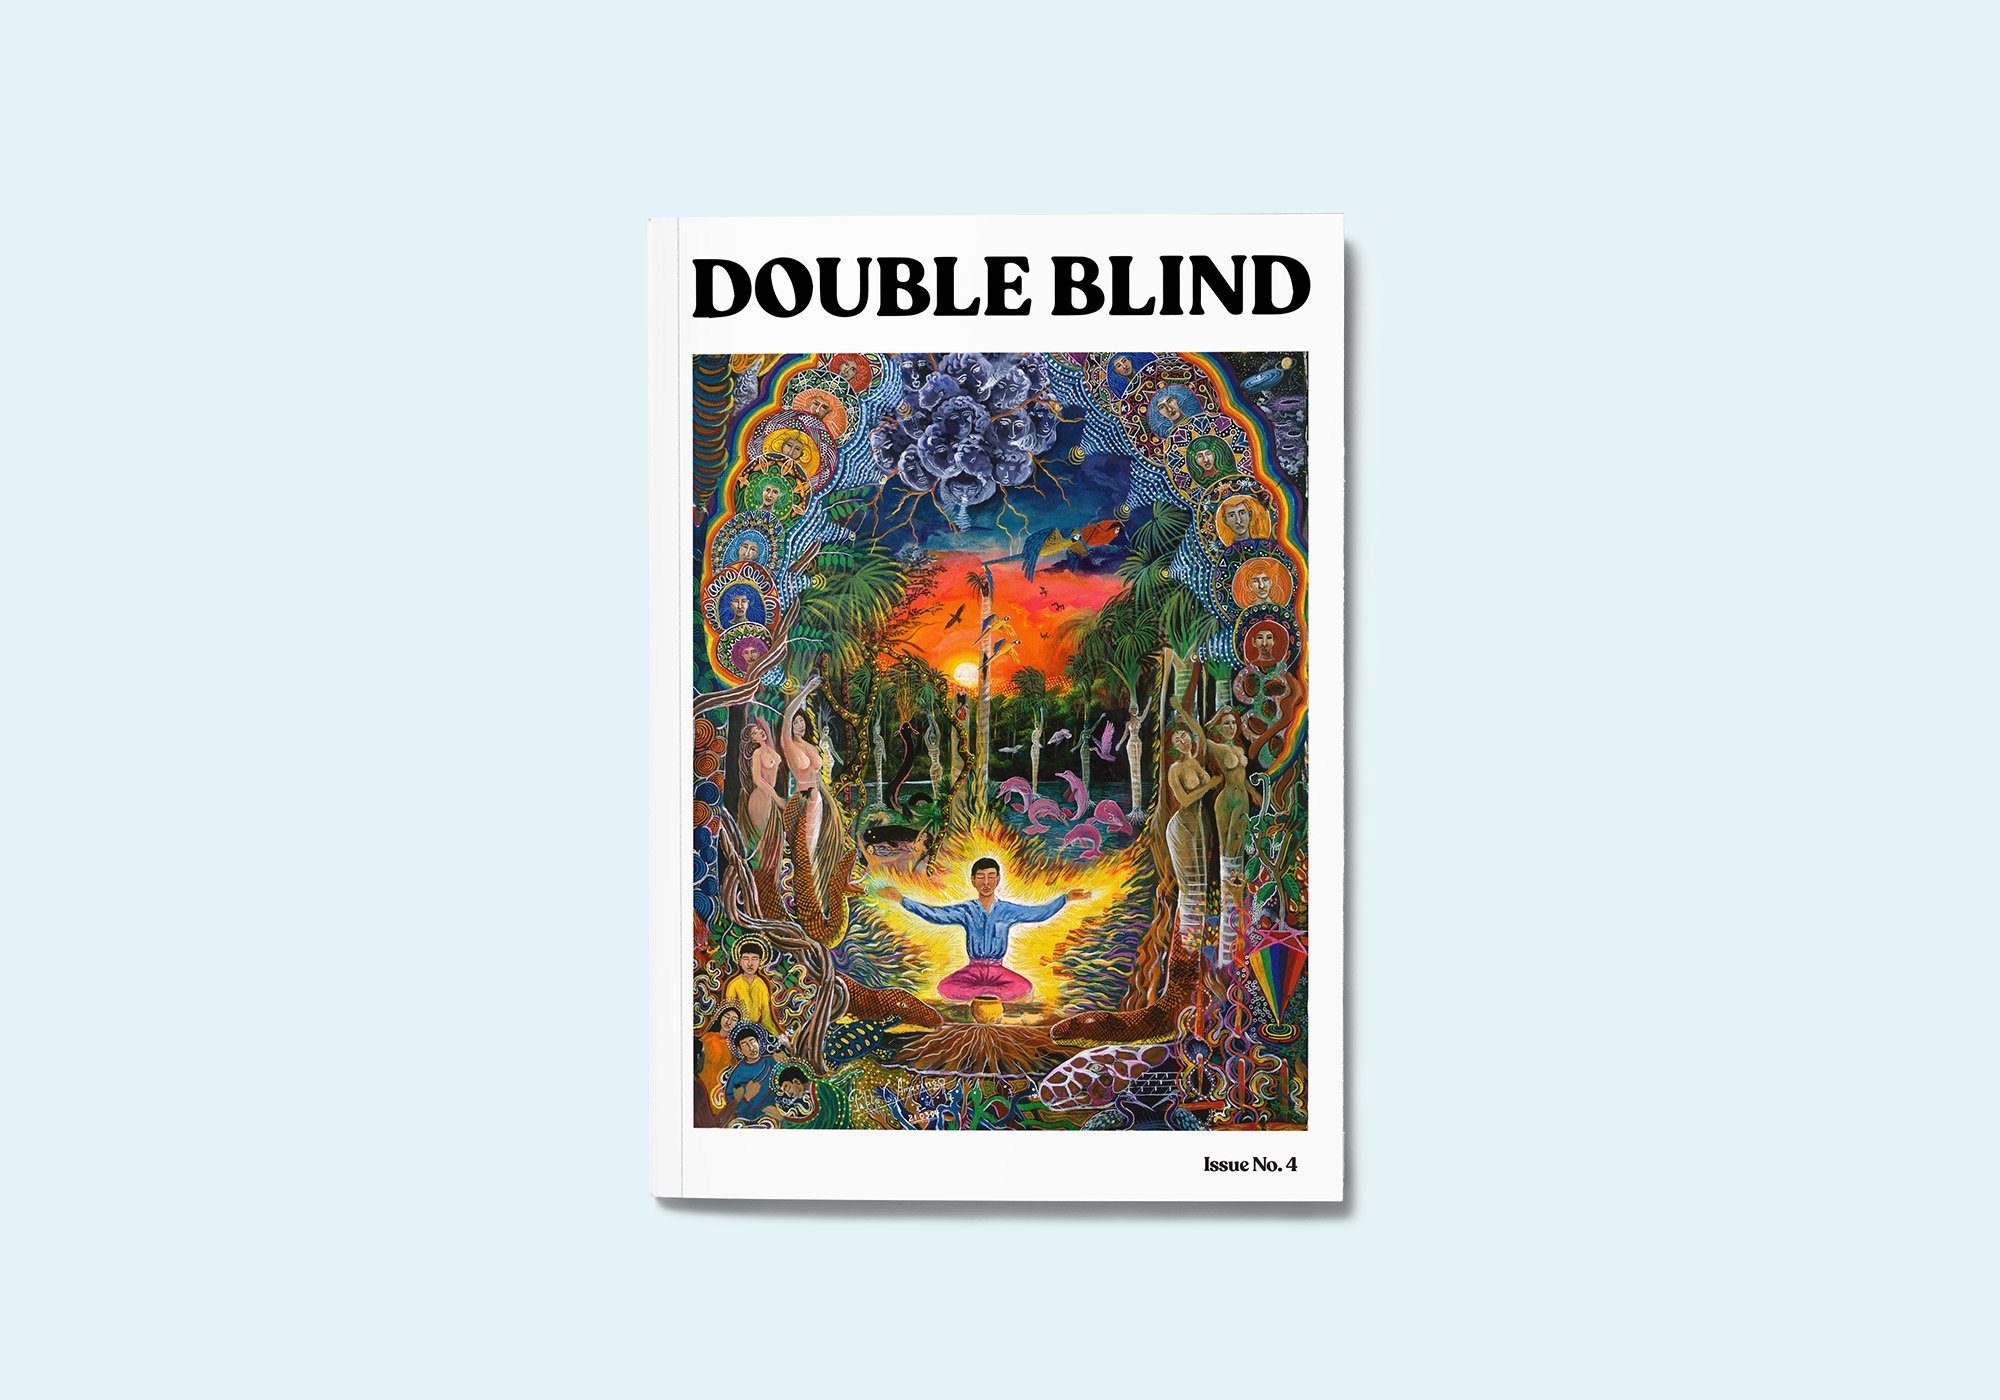 DoubleBlind__0008_DB Issue 4 Cover-transparent.jpg